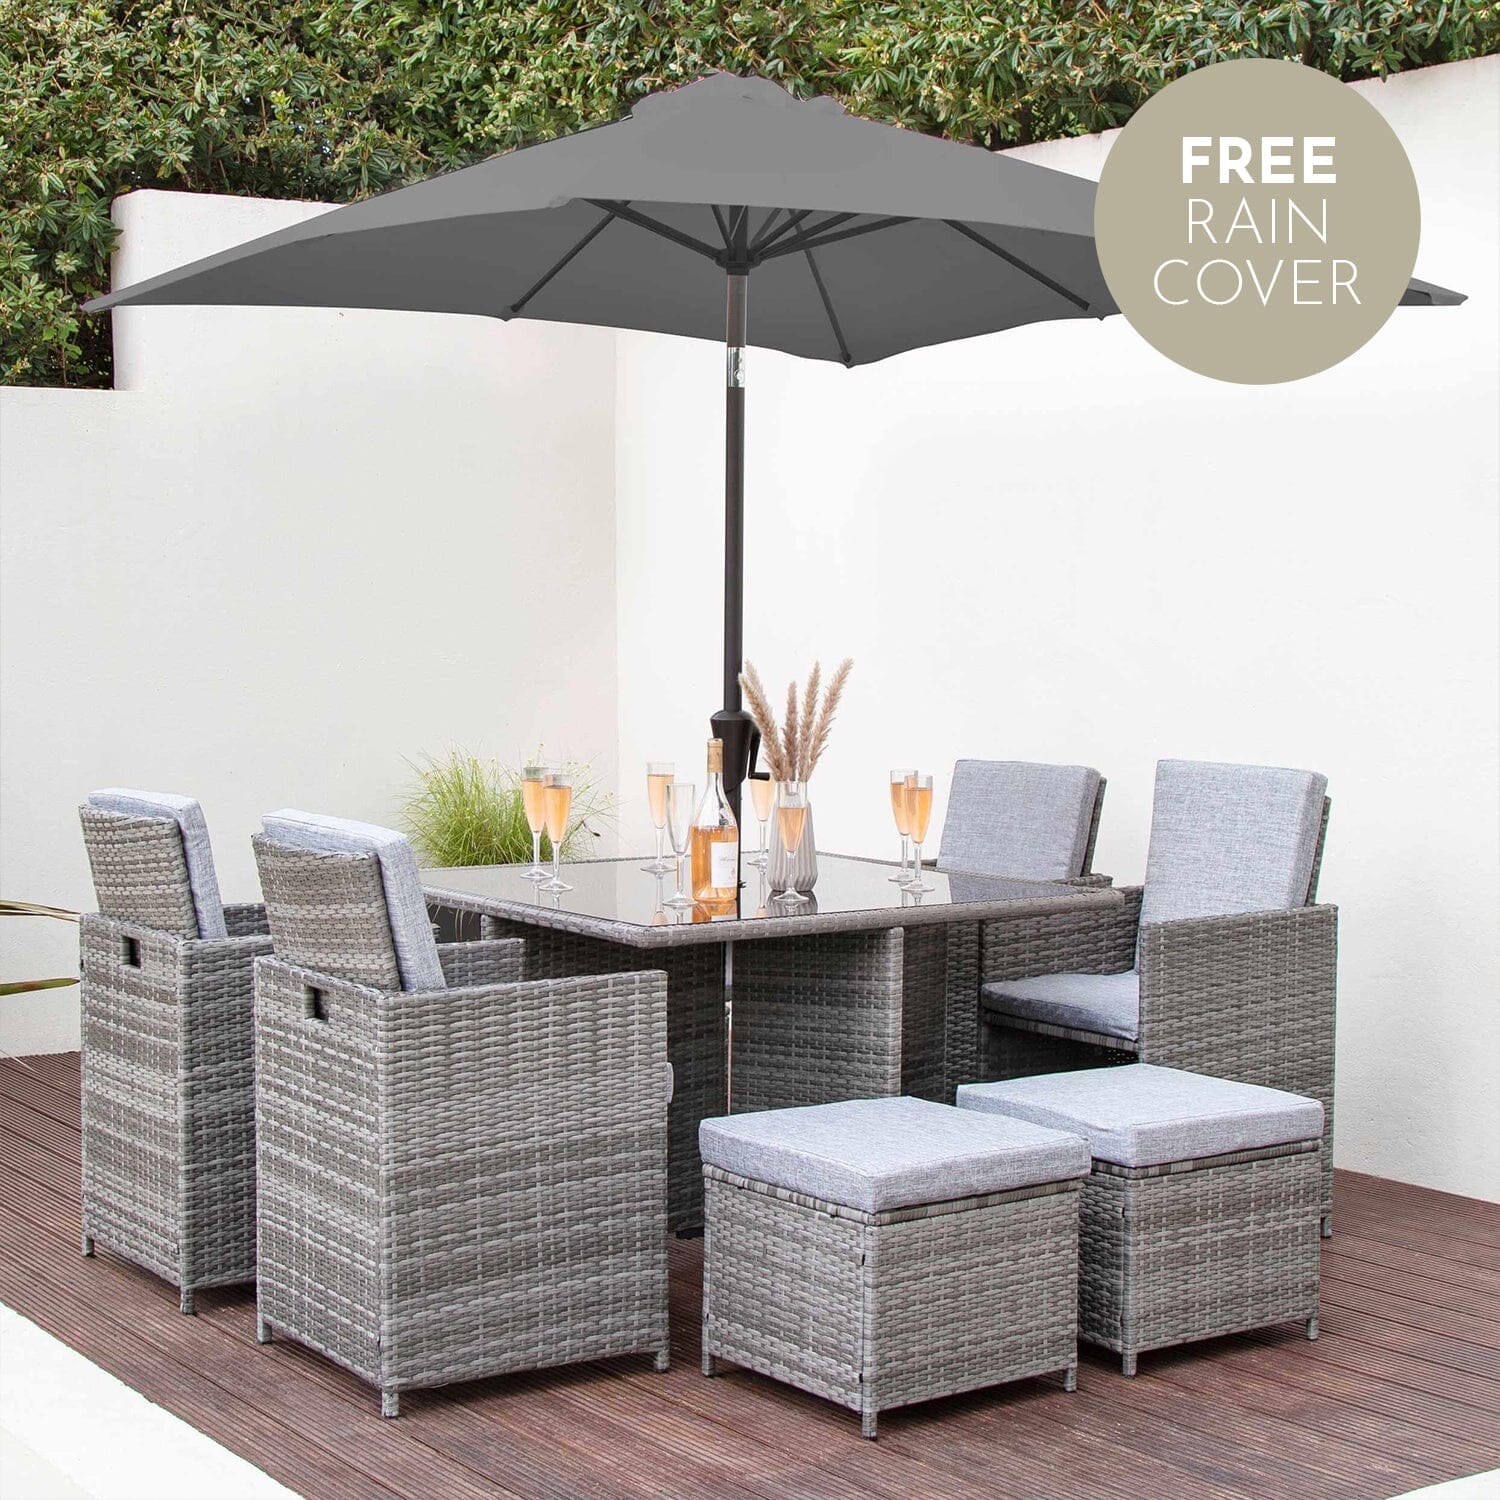 8 Seat Rattan Cube Outdoor Dining Set with LED Premium Parasol - Grey Weave with Grey Custion